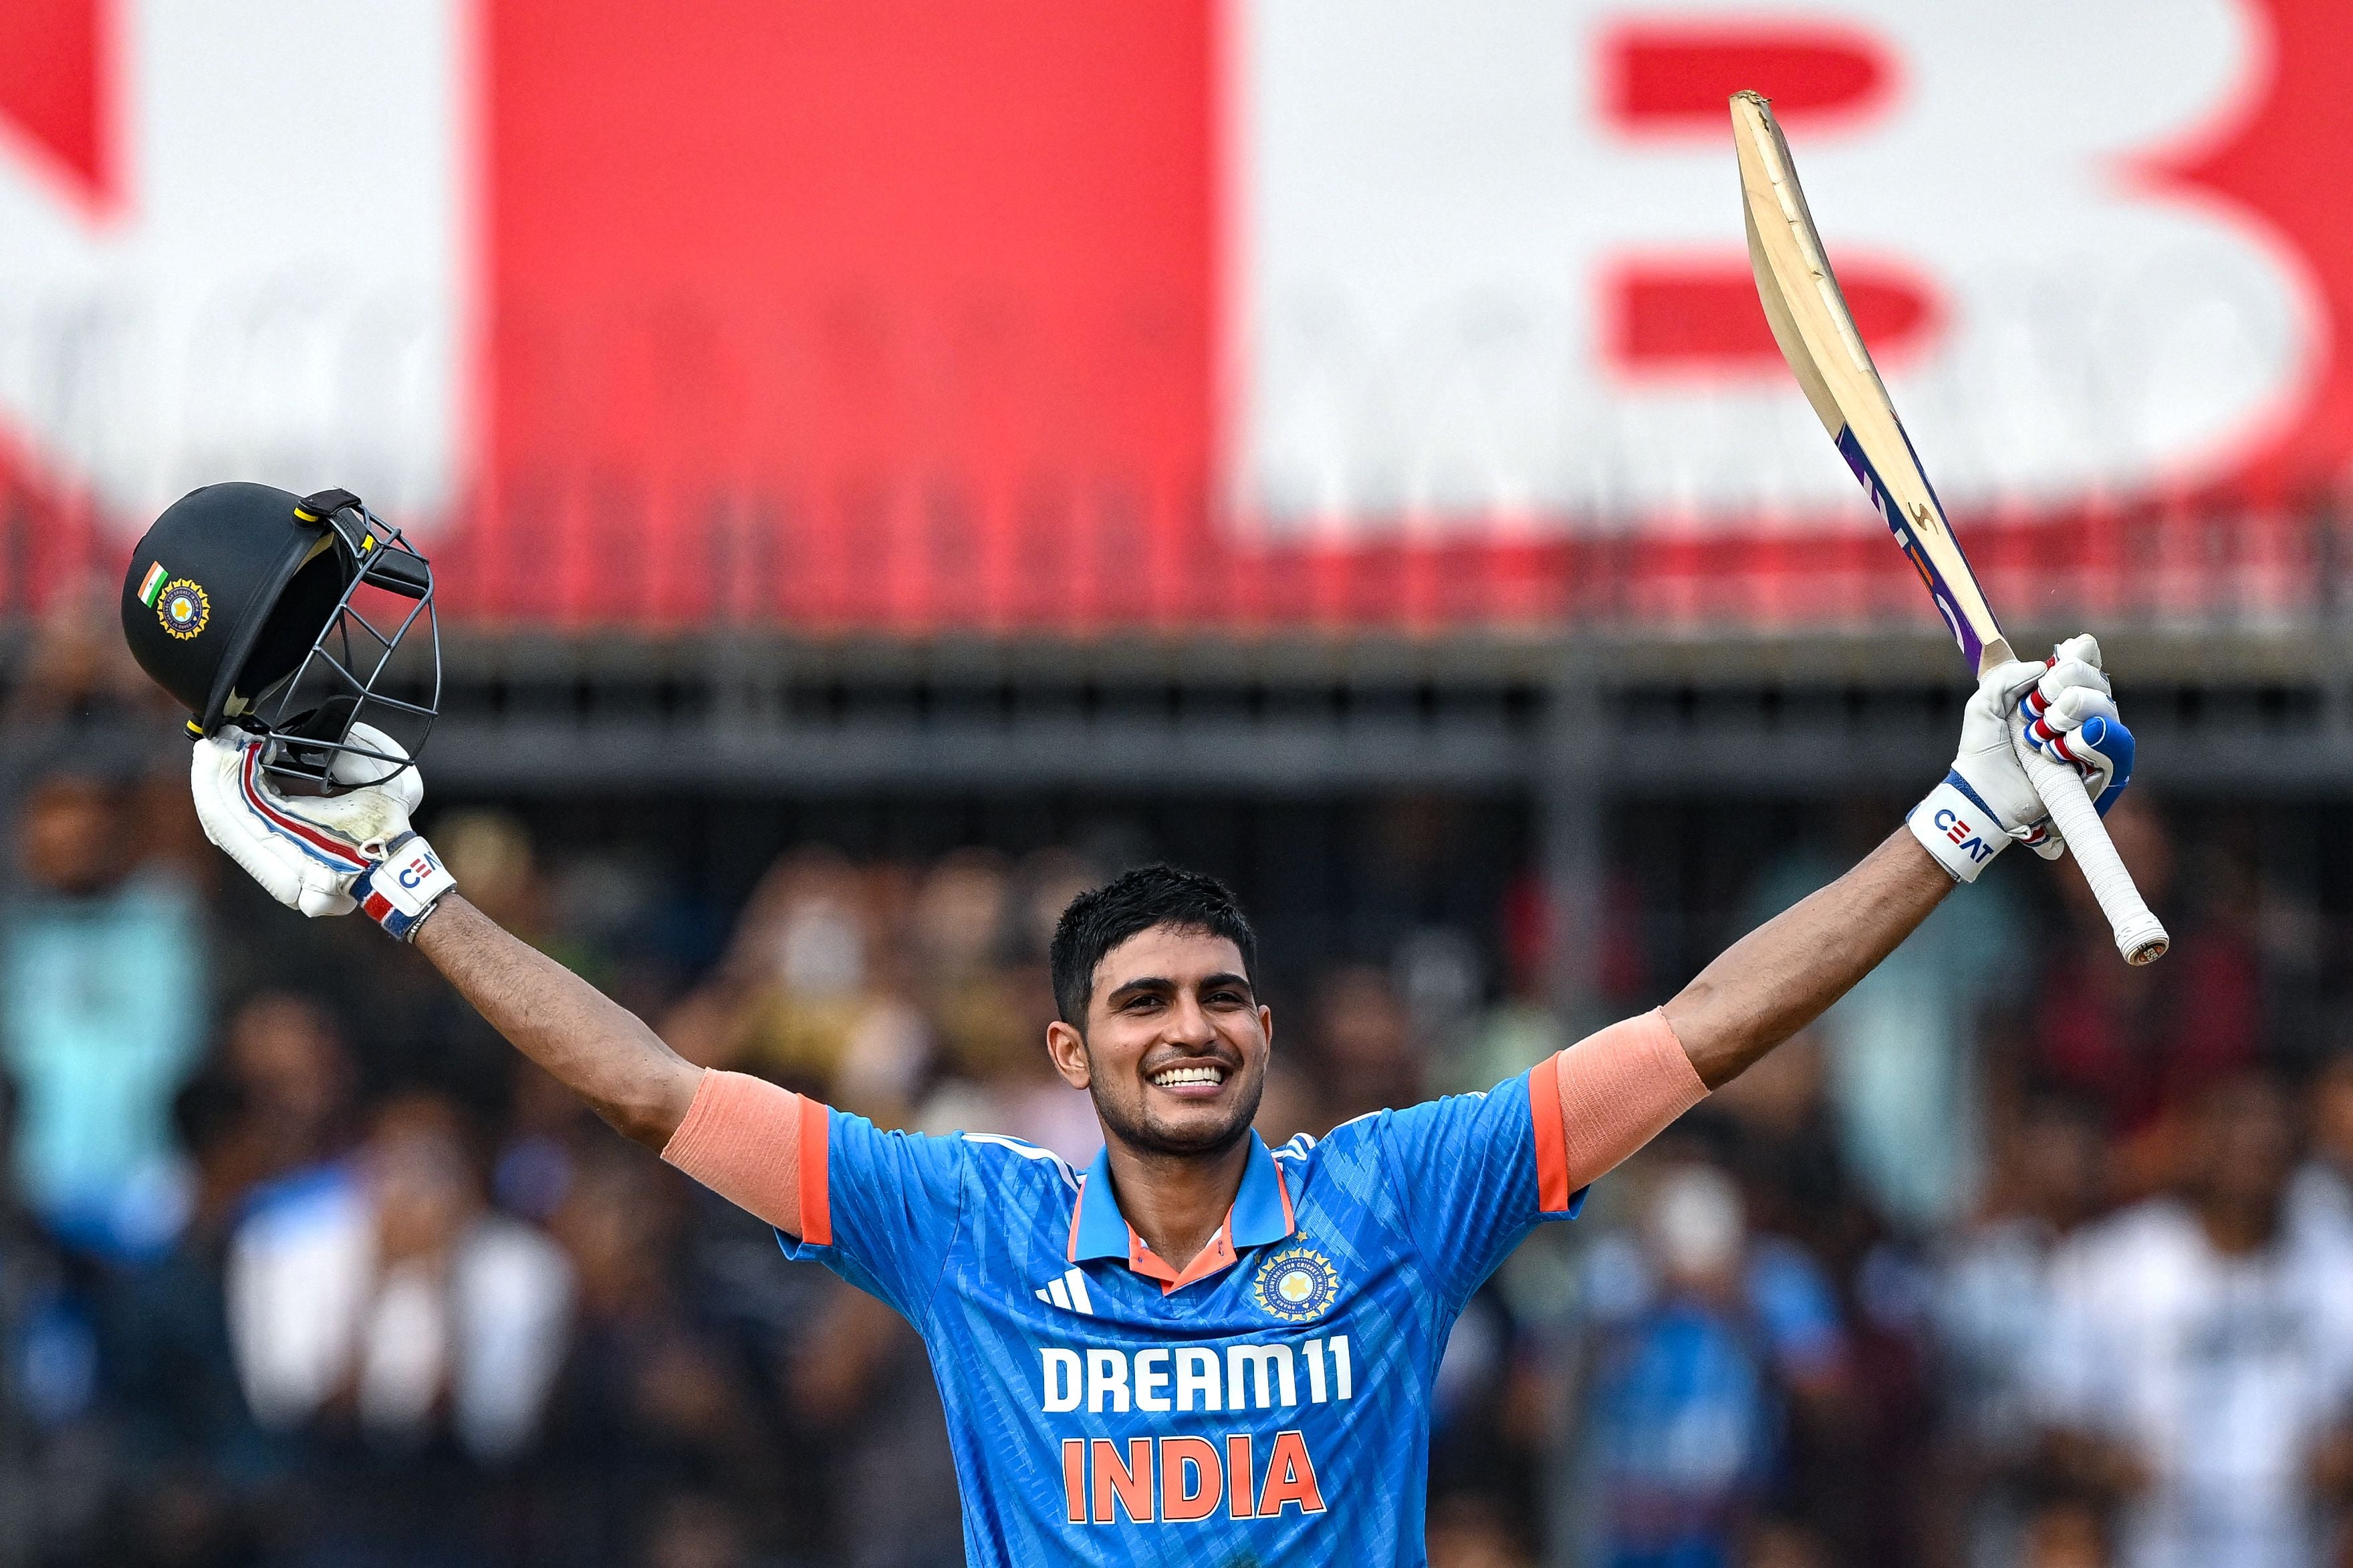 Shubman Gill can reach new heights if he impresses in the Cricket World Cup for India